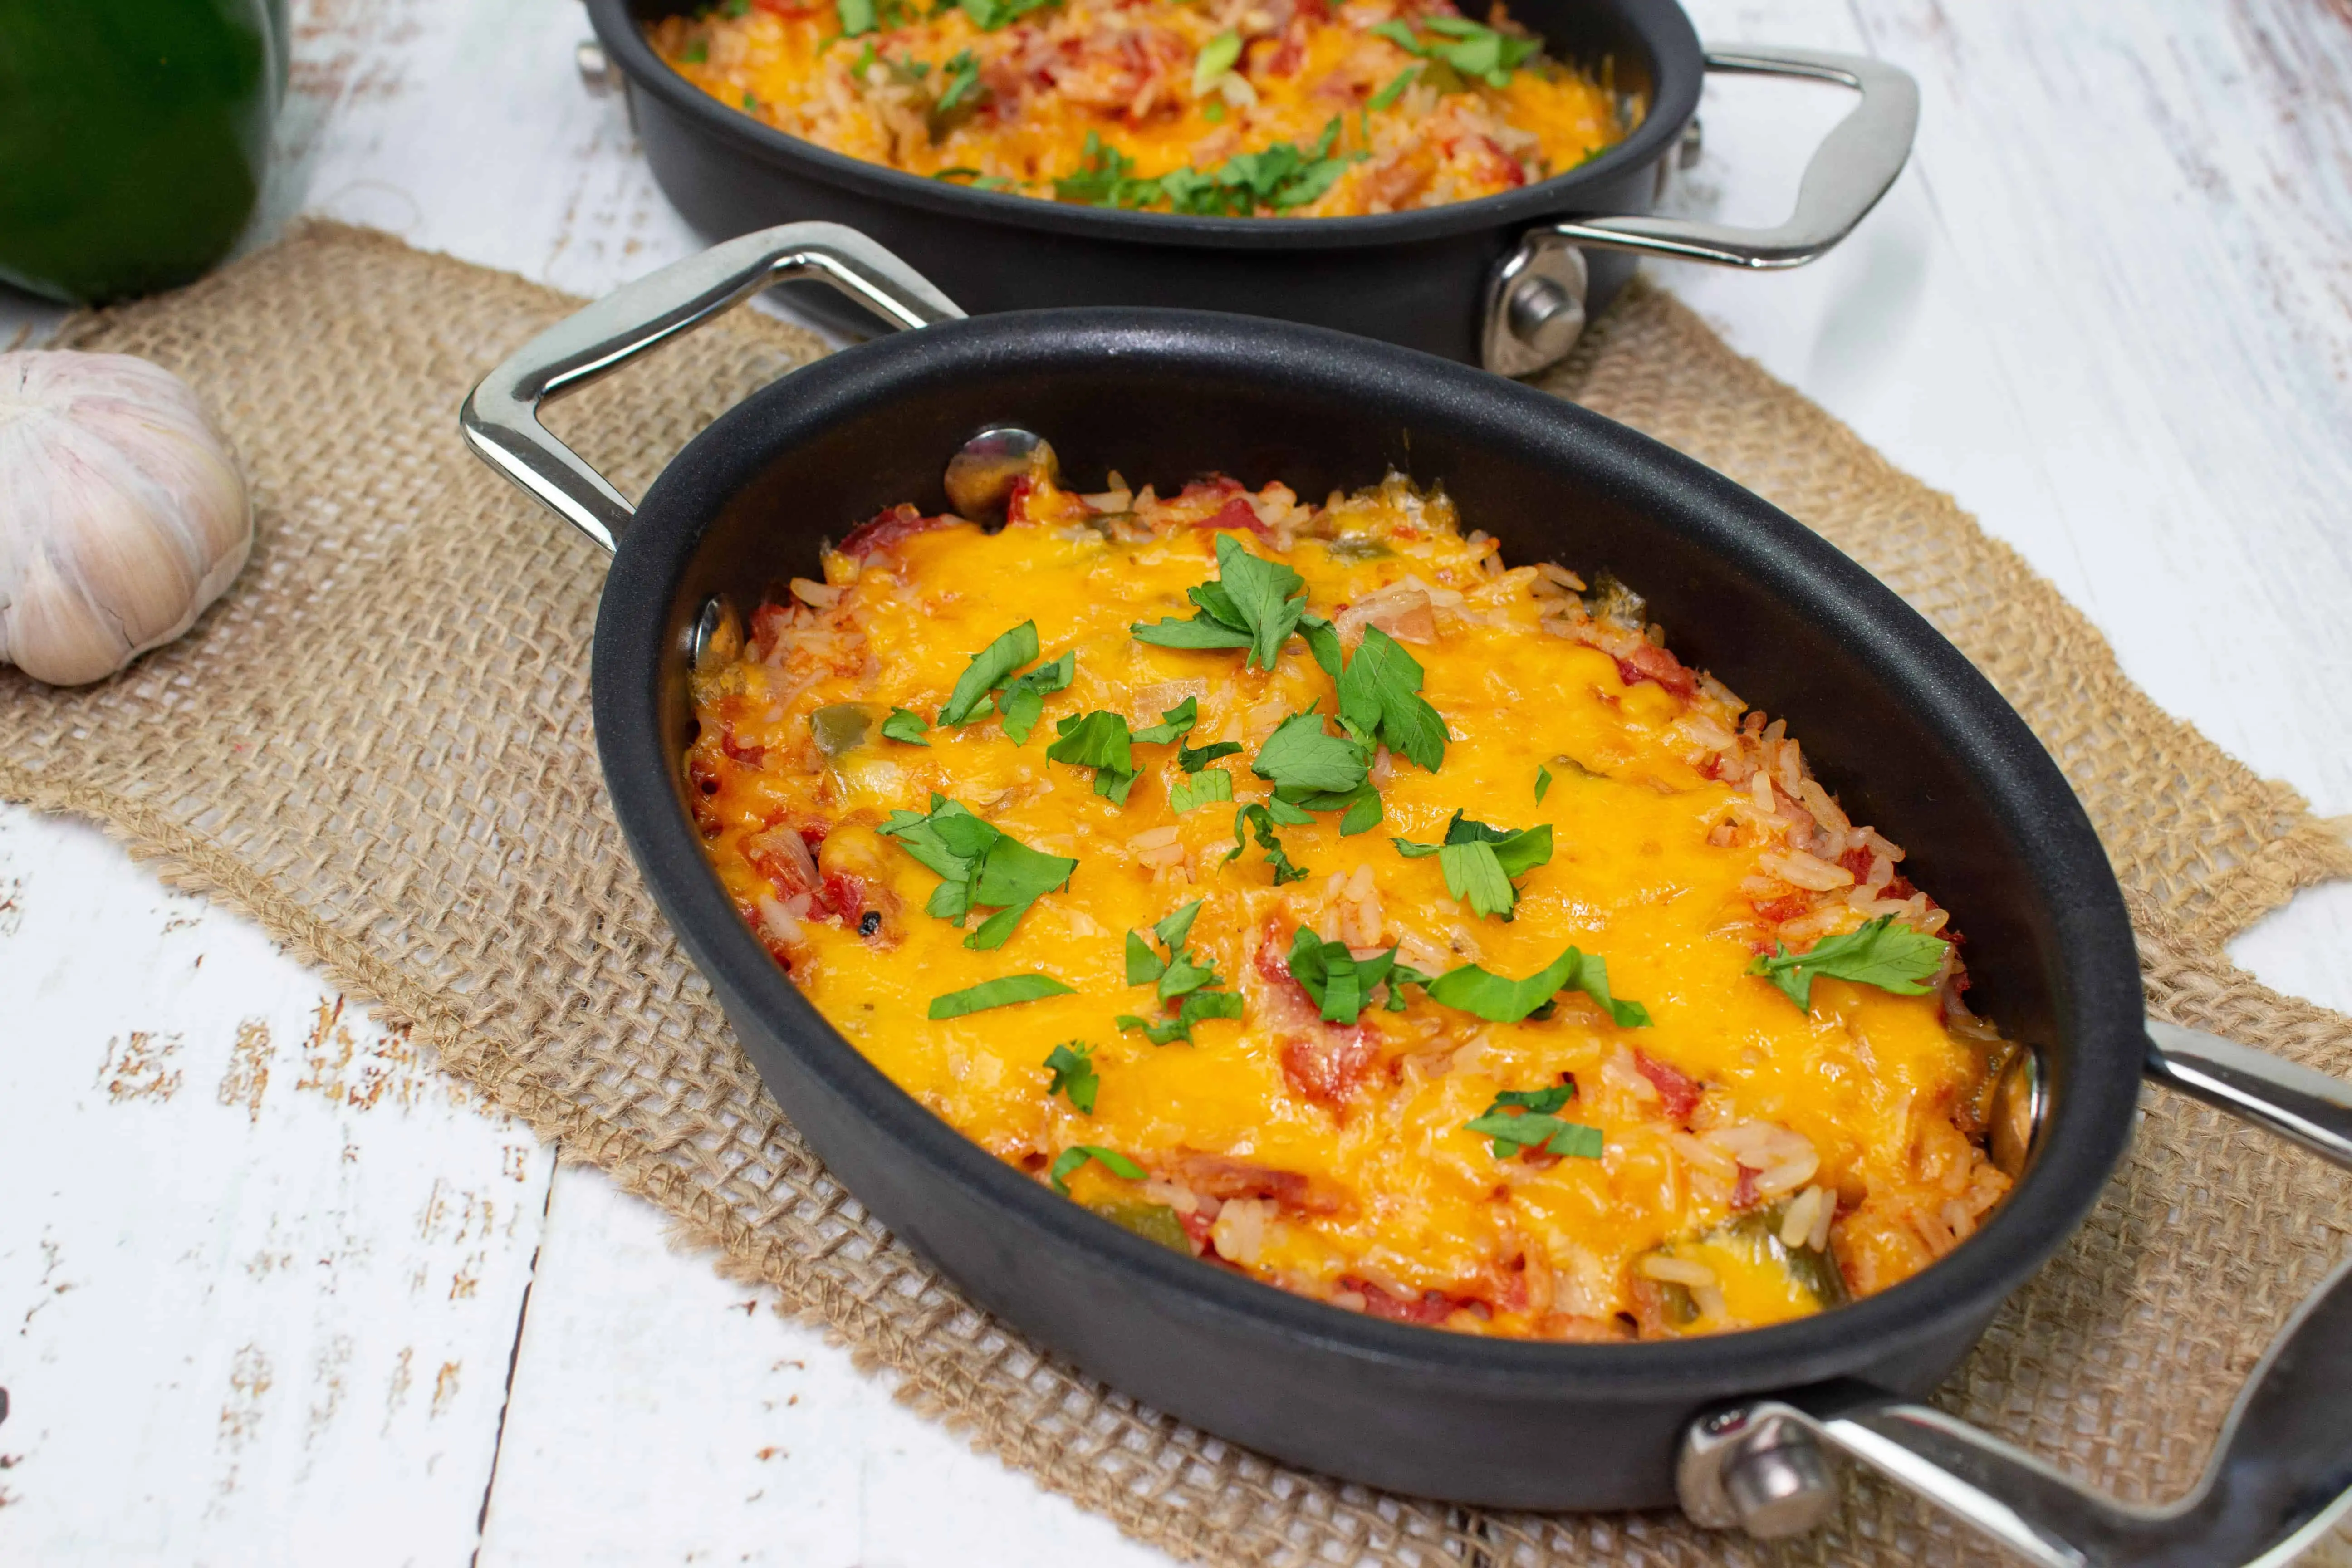 Baked Spanish Rice in two black baking dishes.